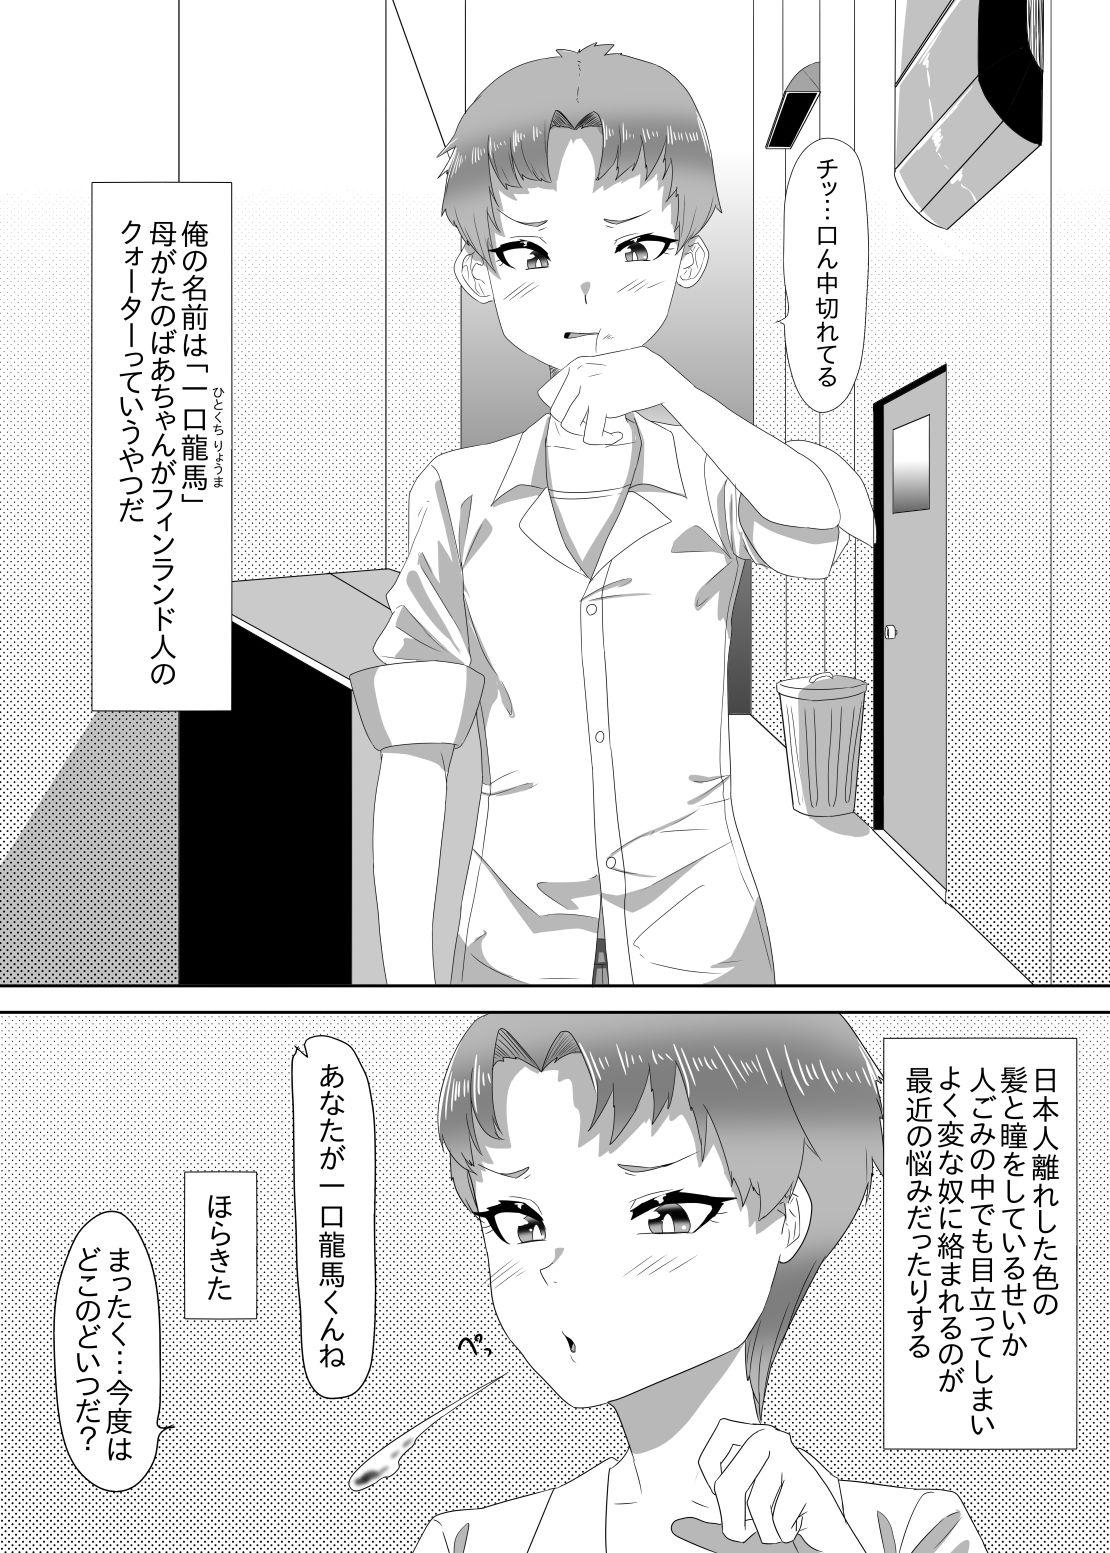 Anal ふたなり生徒会長の不良男の娘更生計画1 Analfucking - Page 3